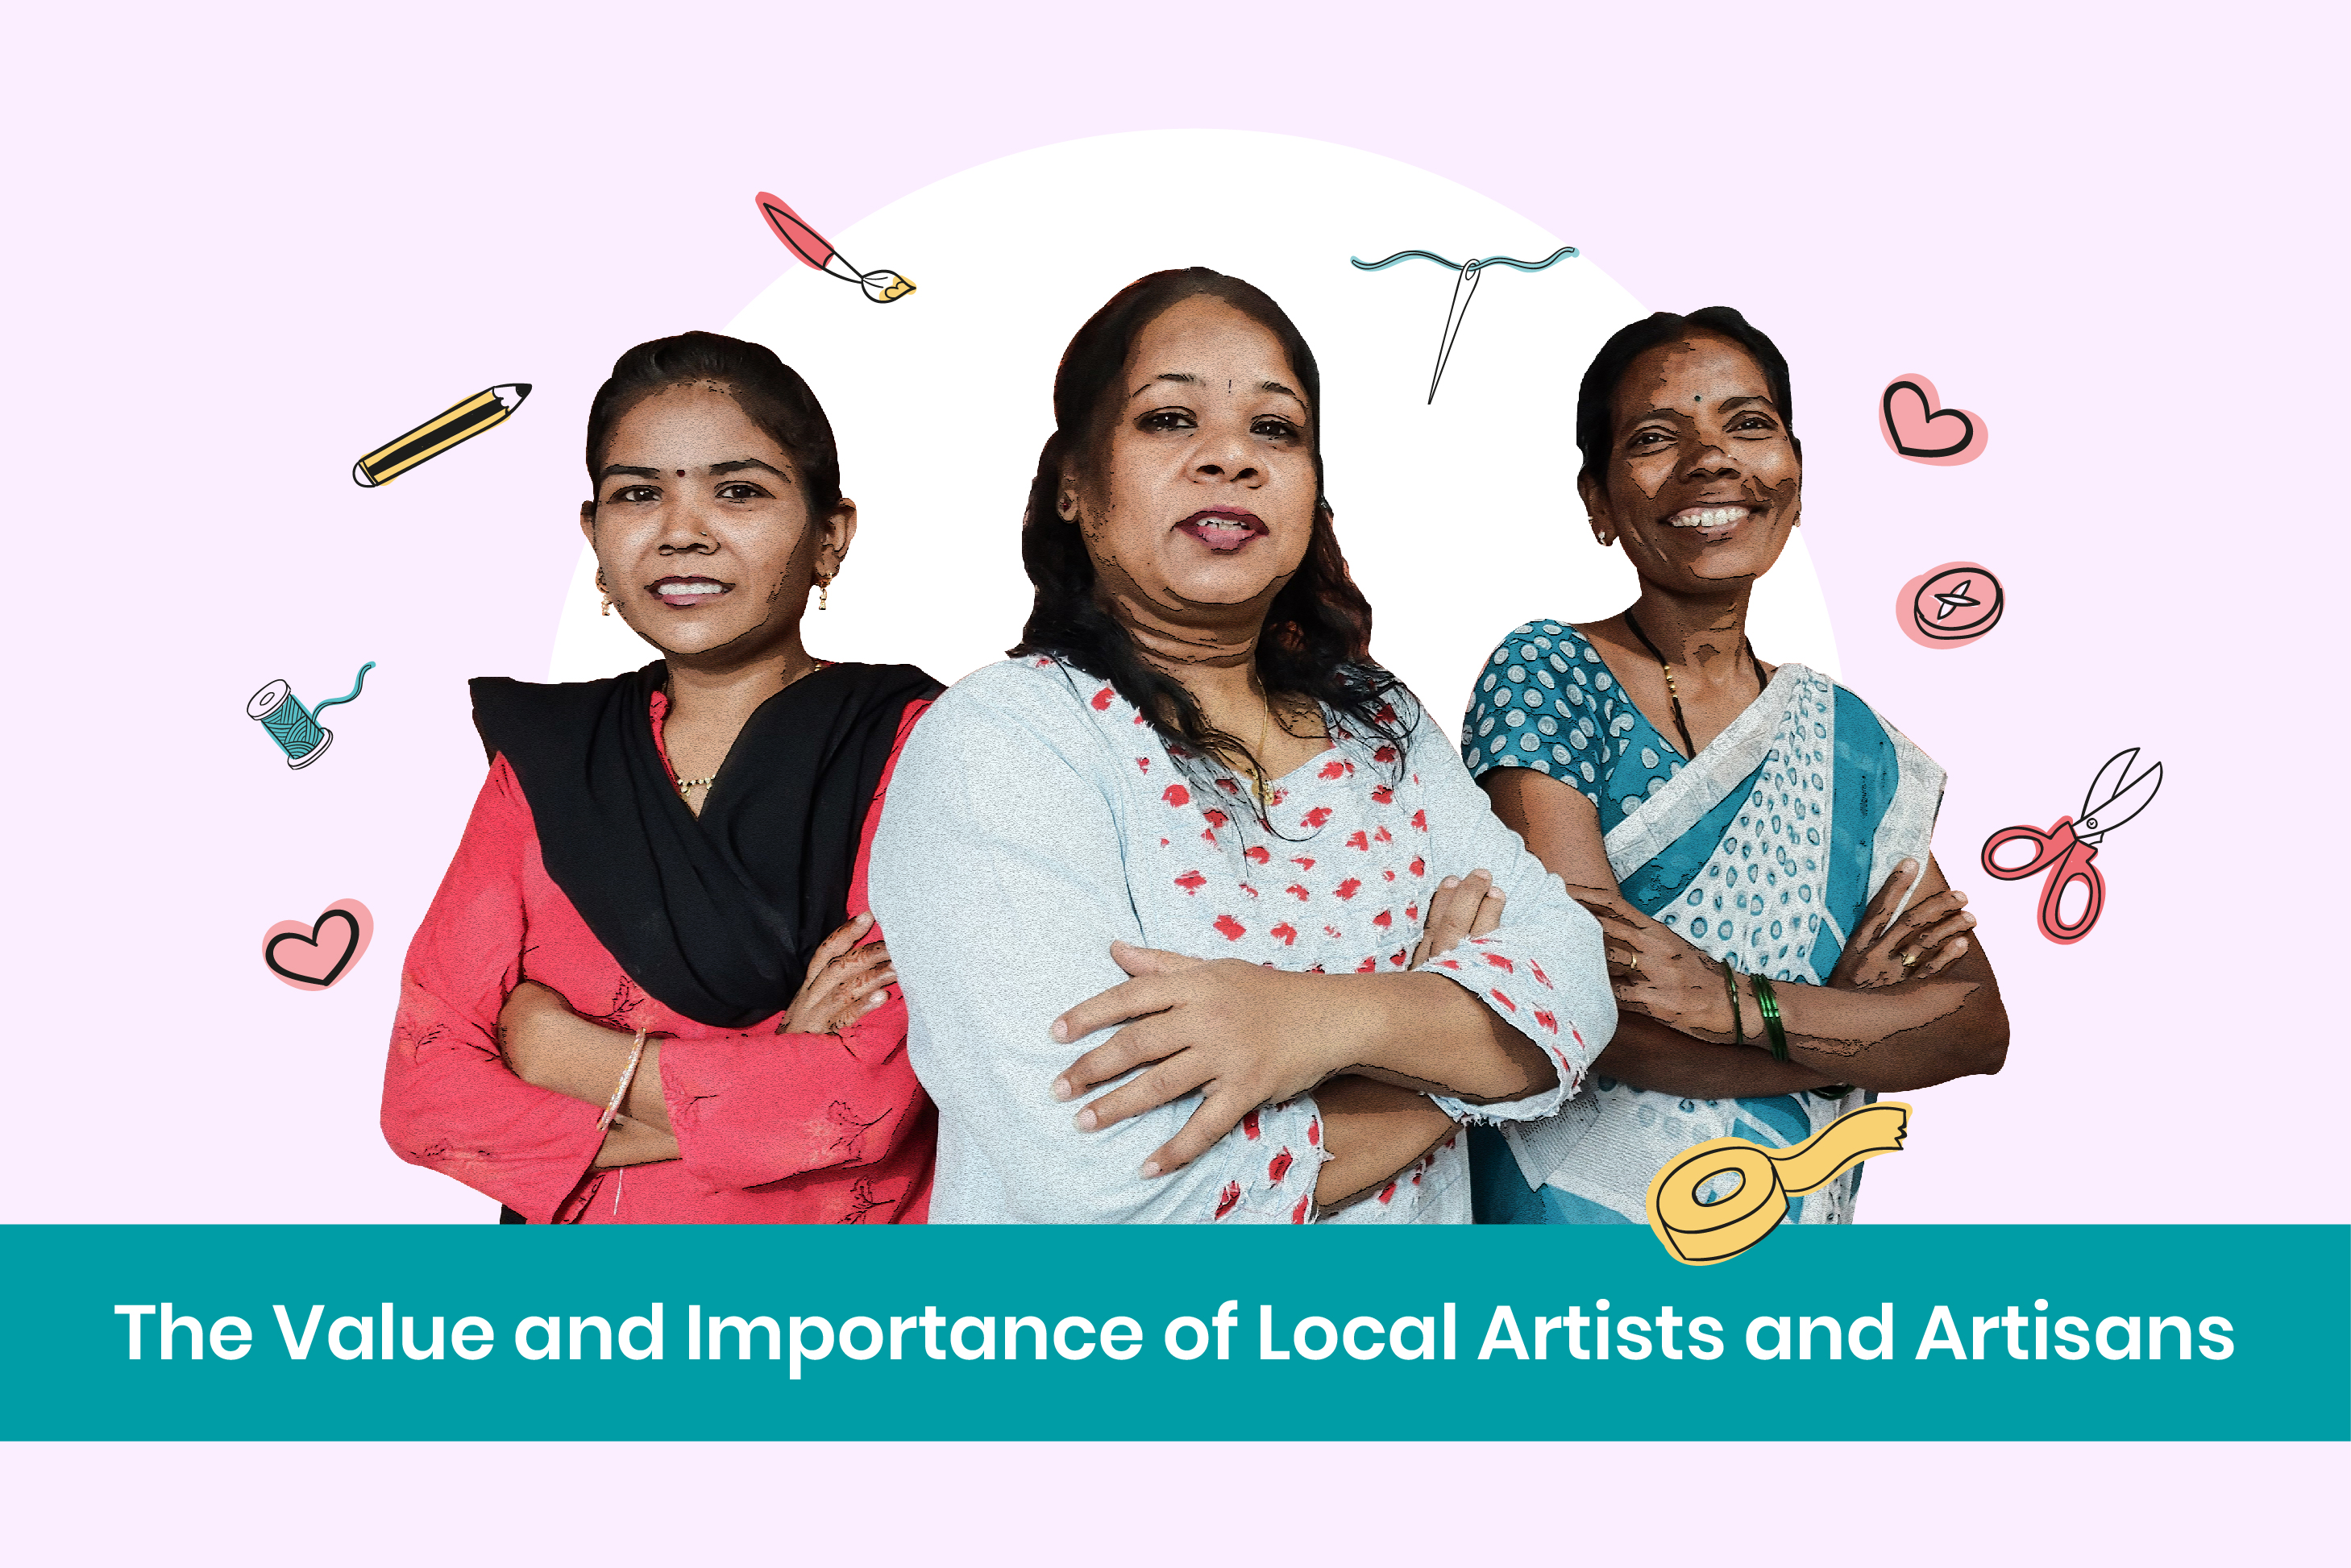 Importance of Local Artists